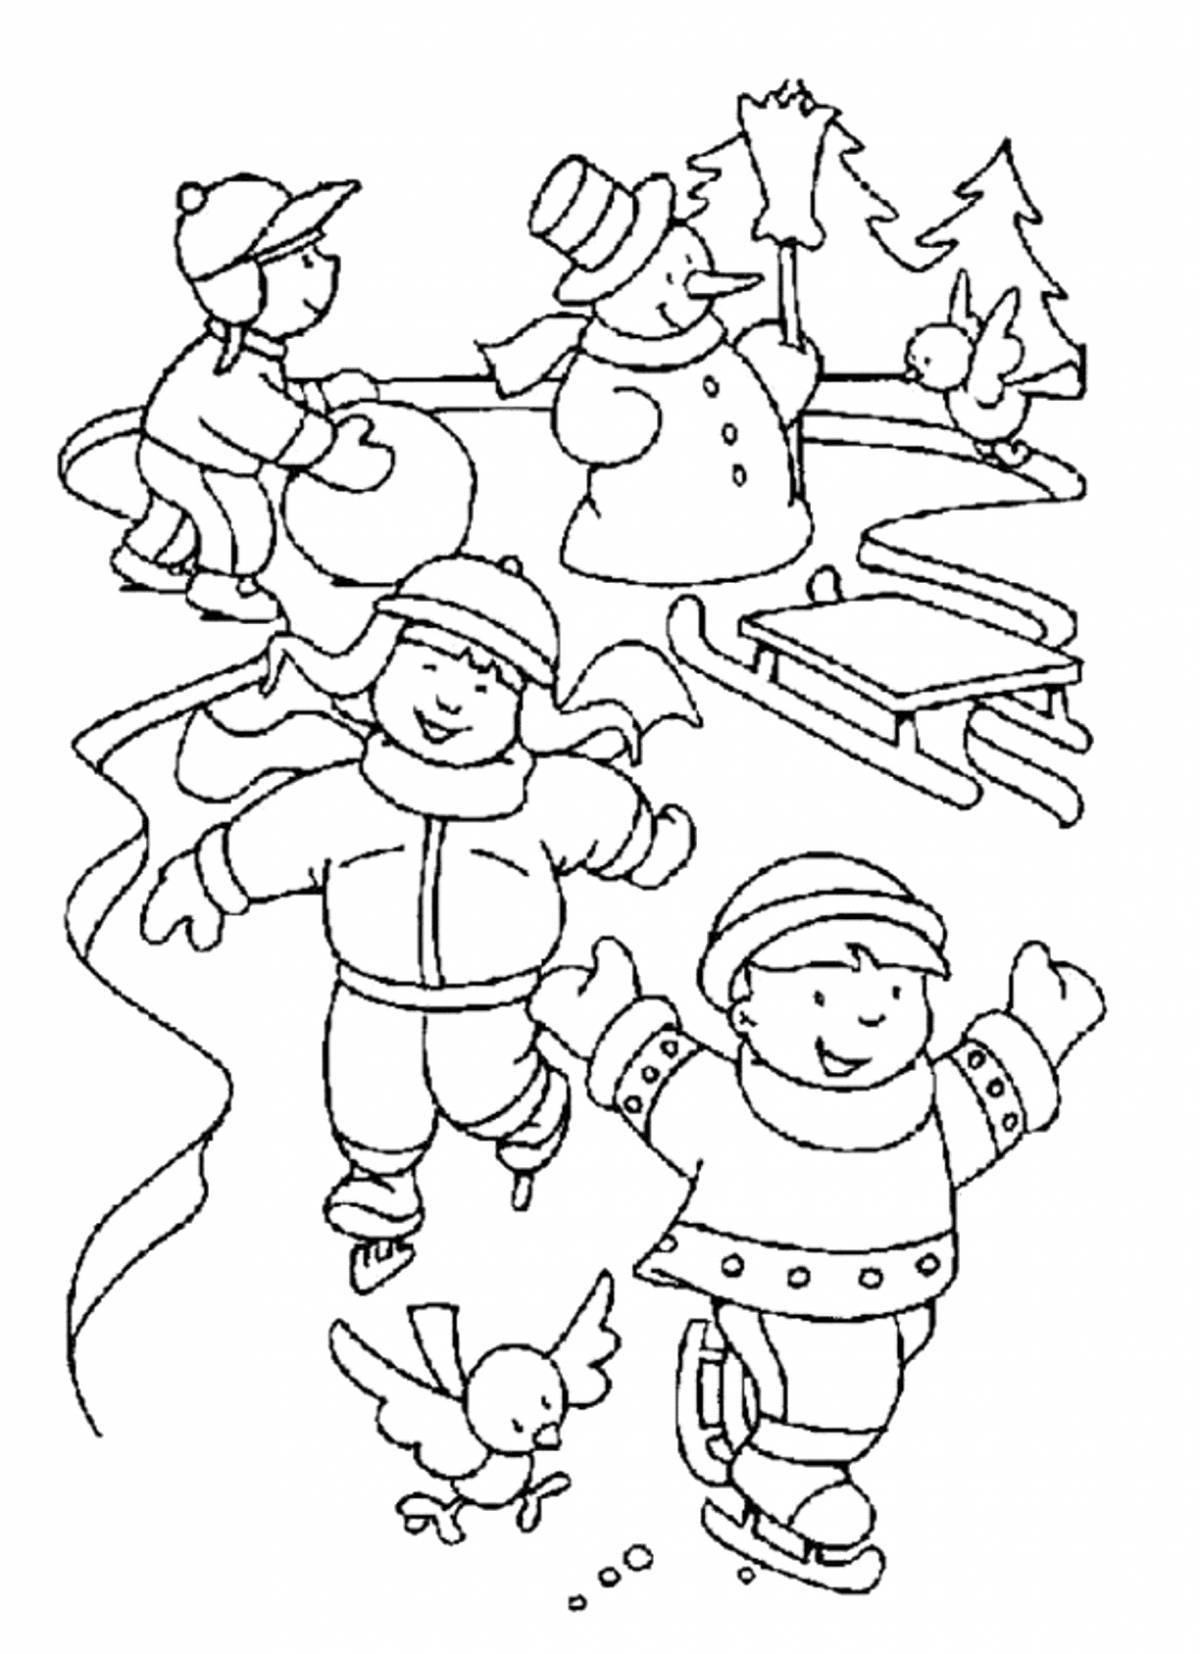 Live coloring for children winter fun 5-6 years